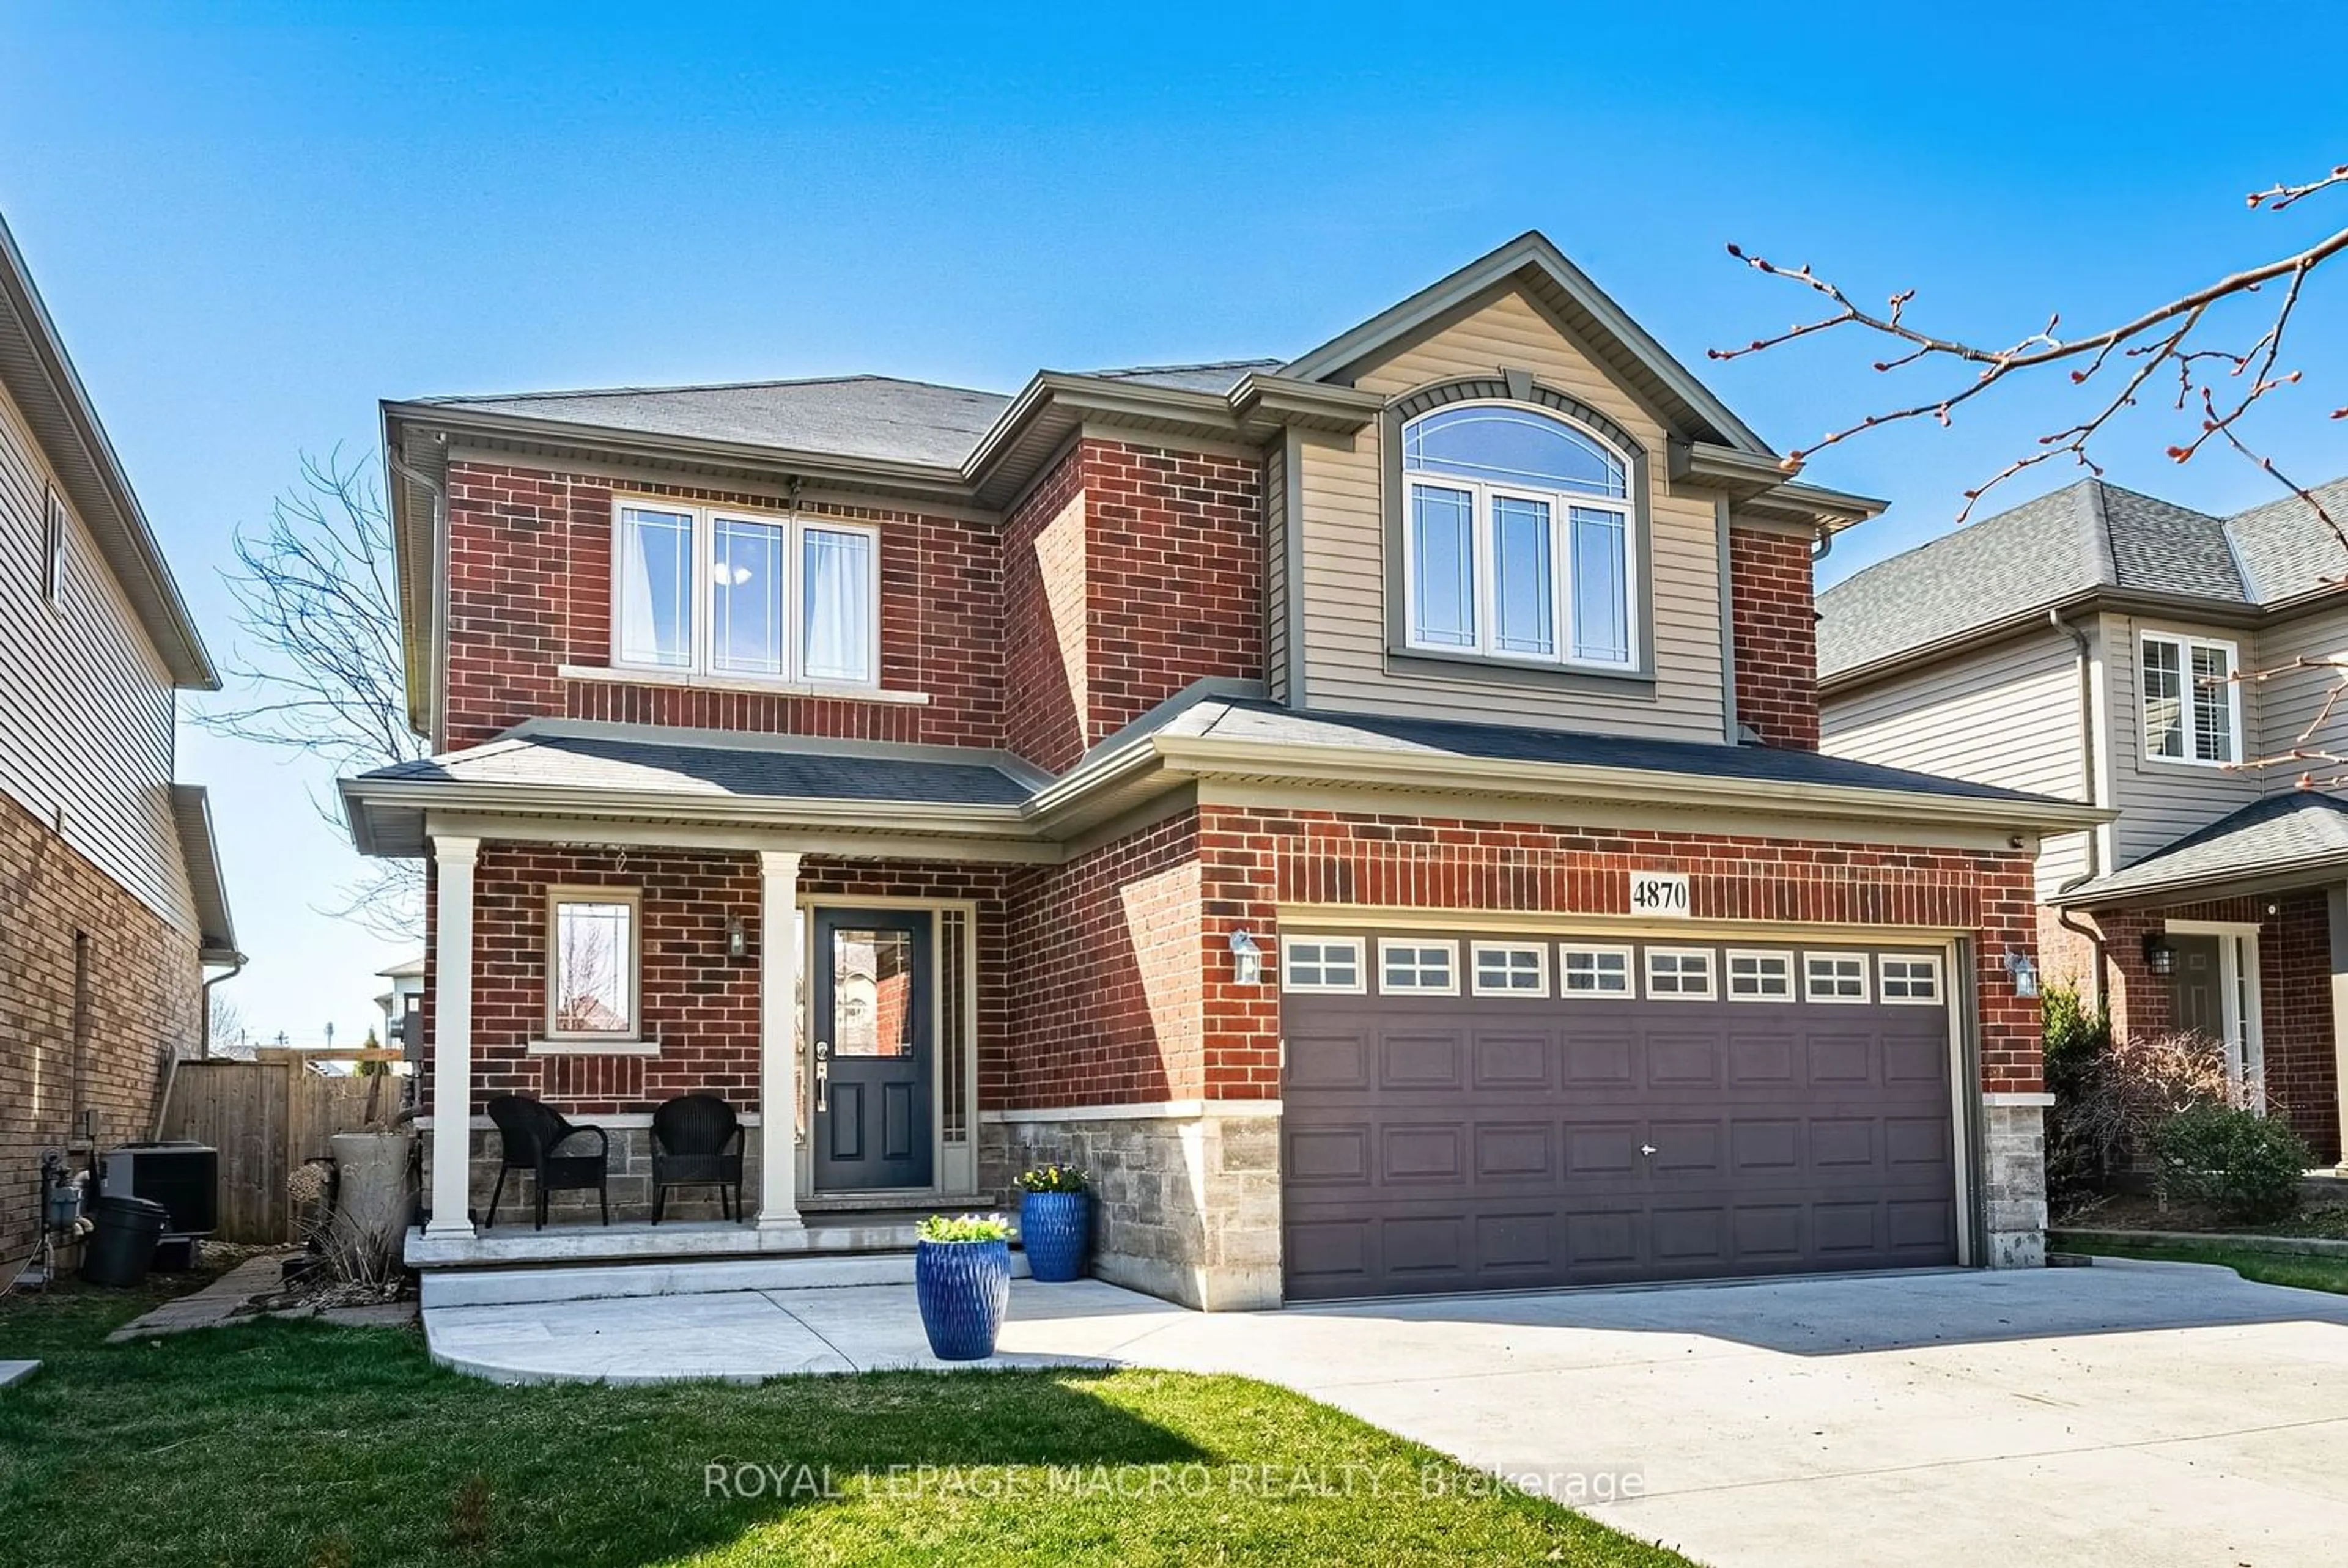 Home with brick exterior material for 4870 Allan Crt, Lincoln Ontario L0R 1B3